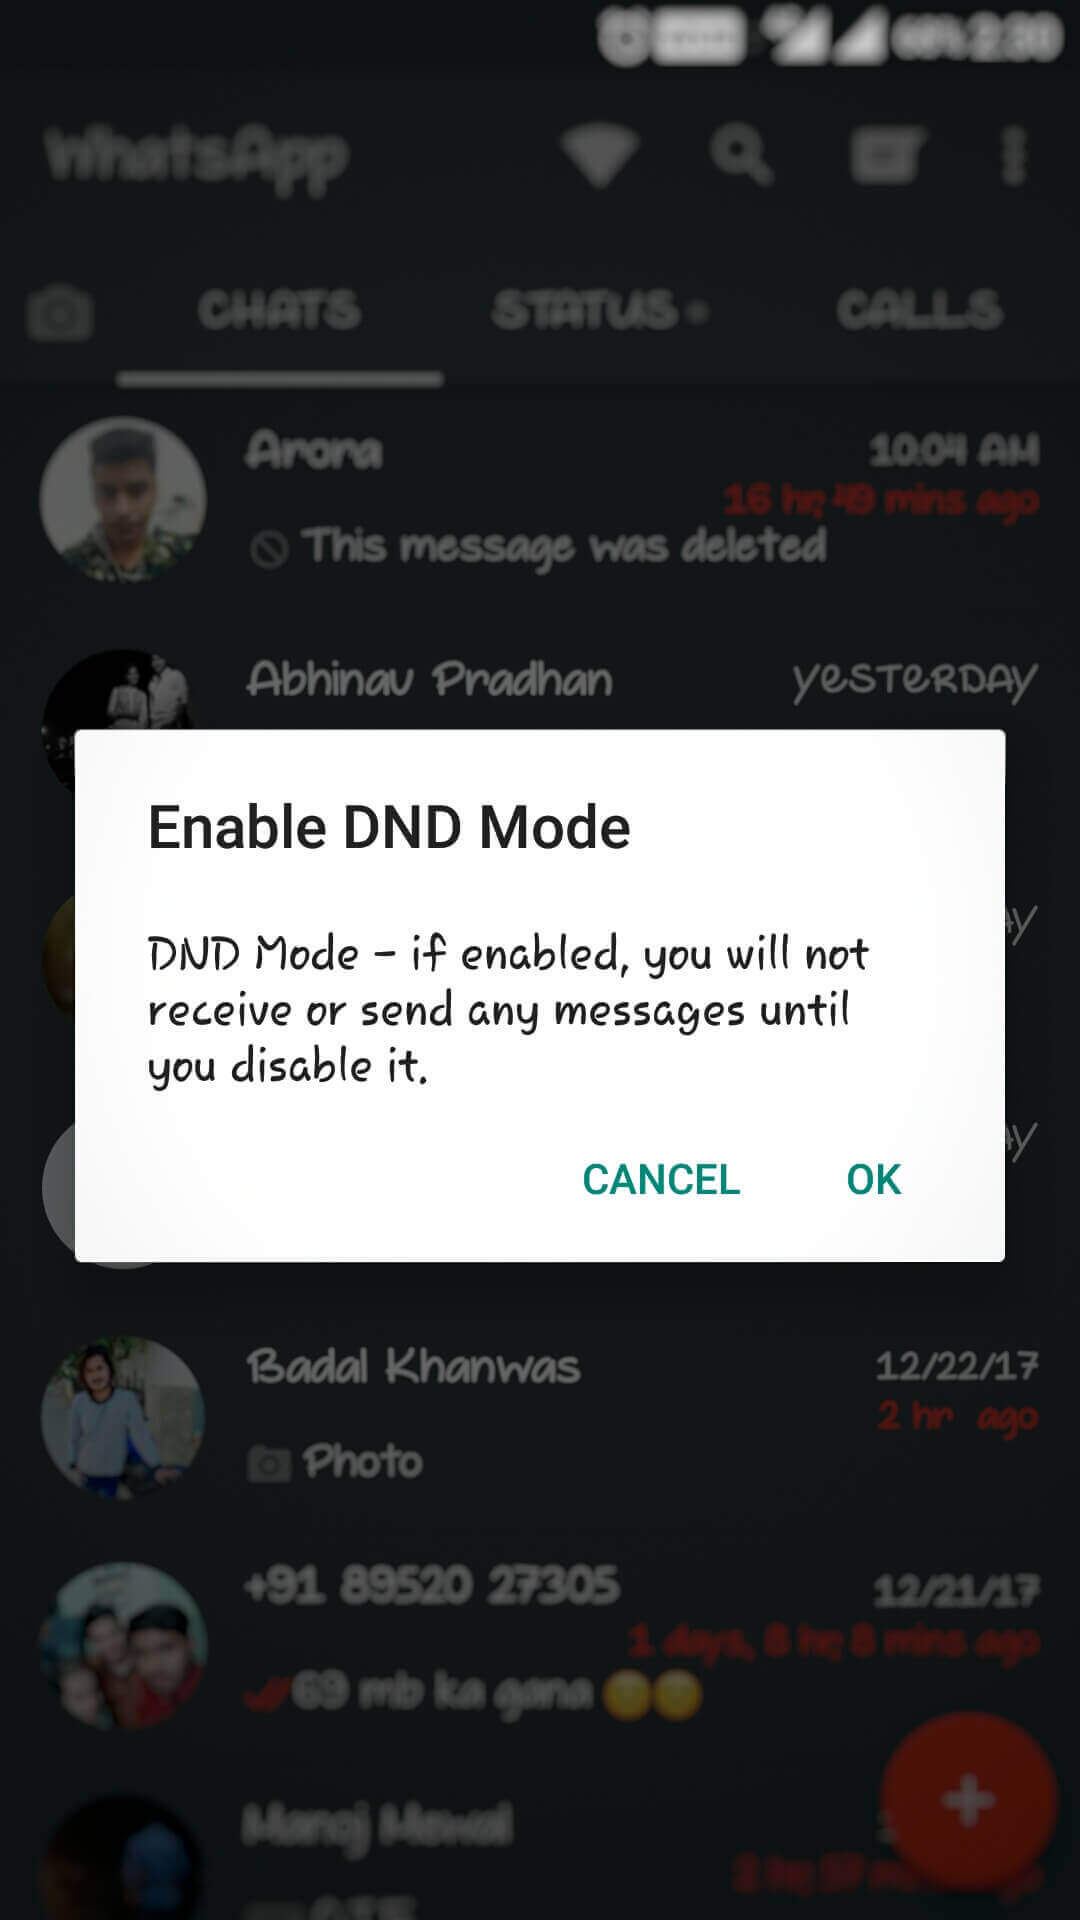 How to Use DND Mode in GBWhatsApp